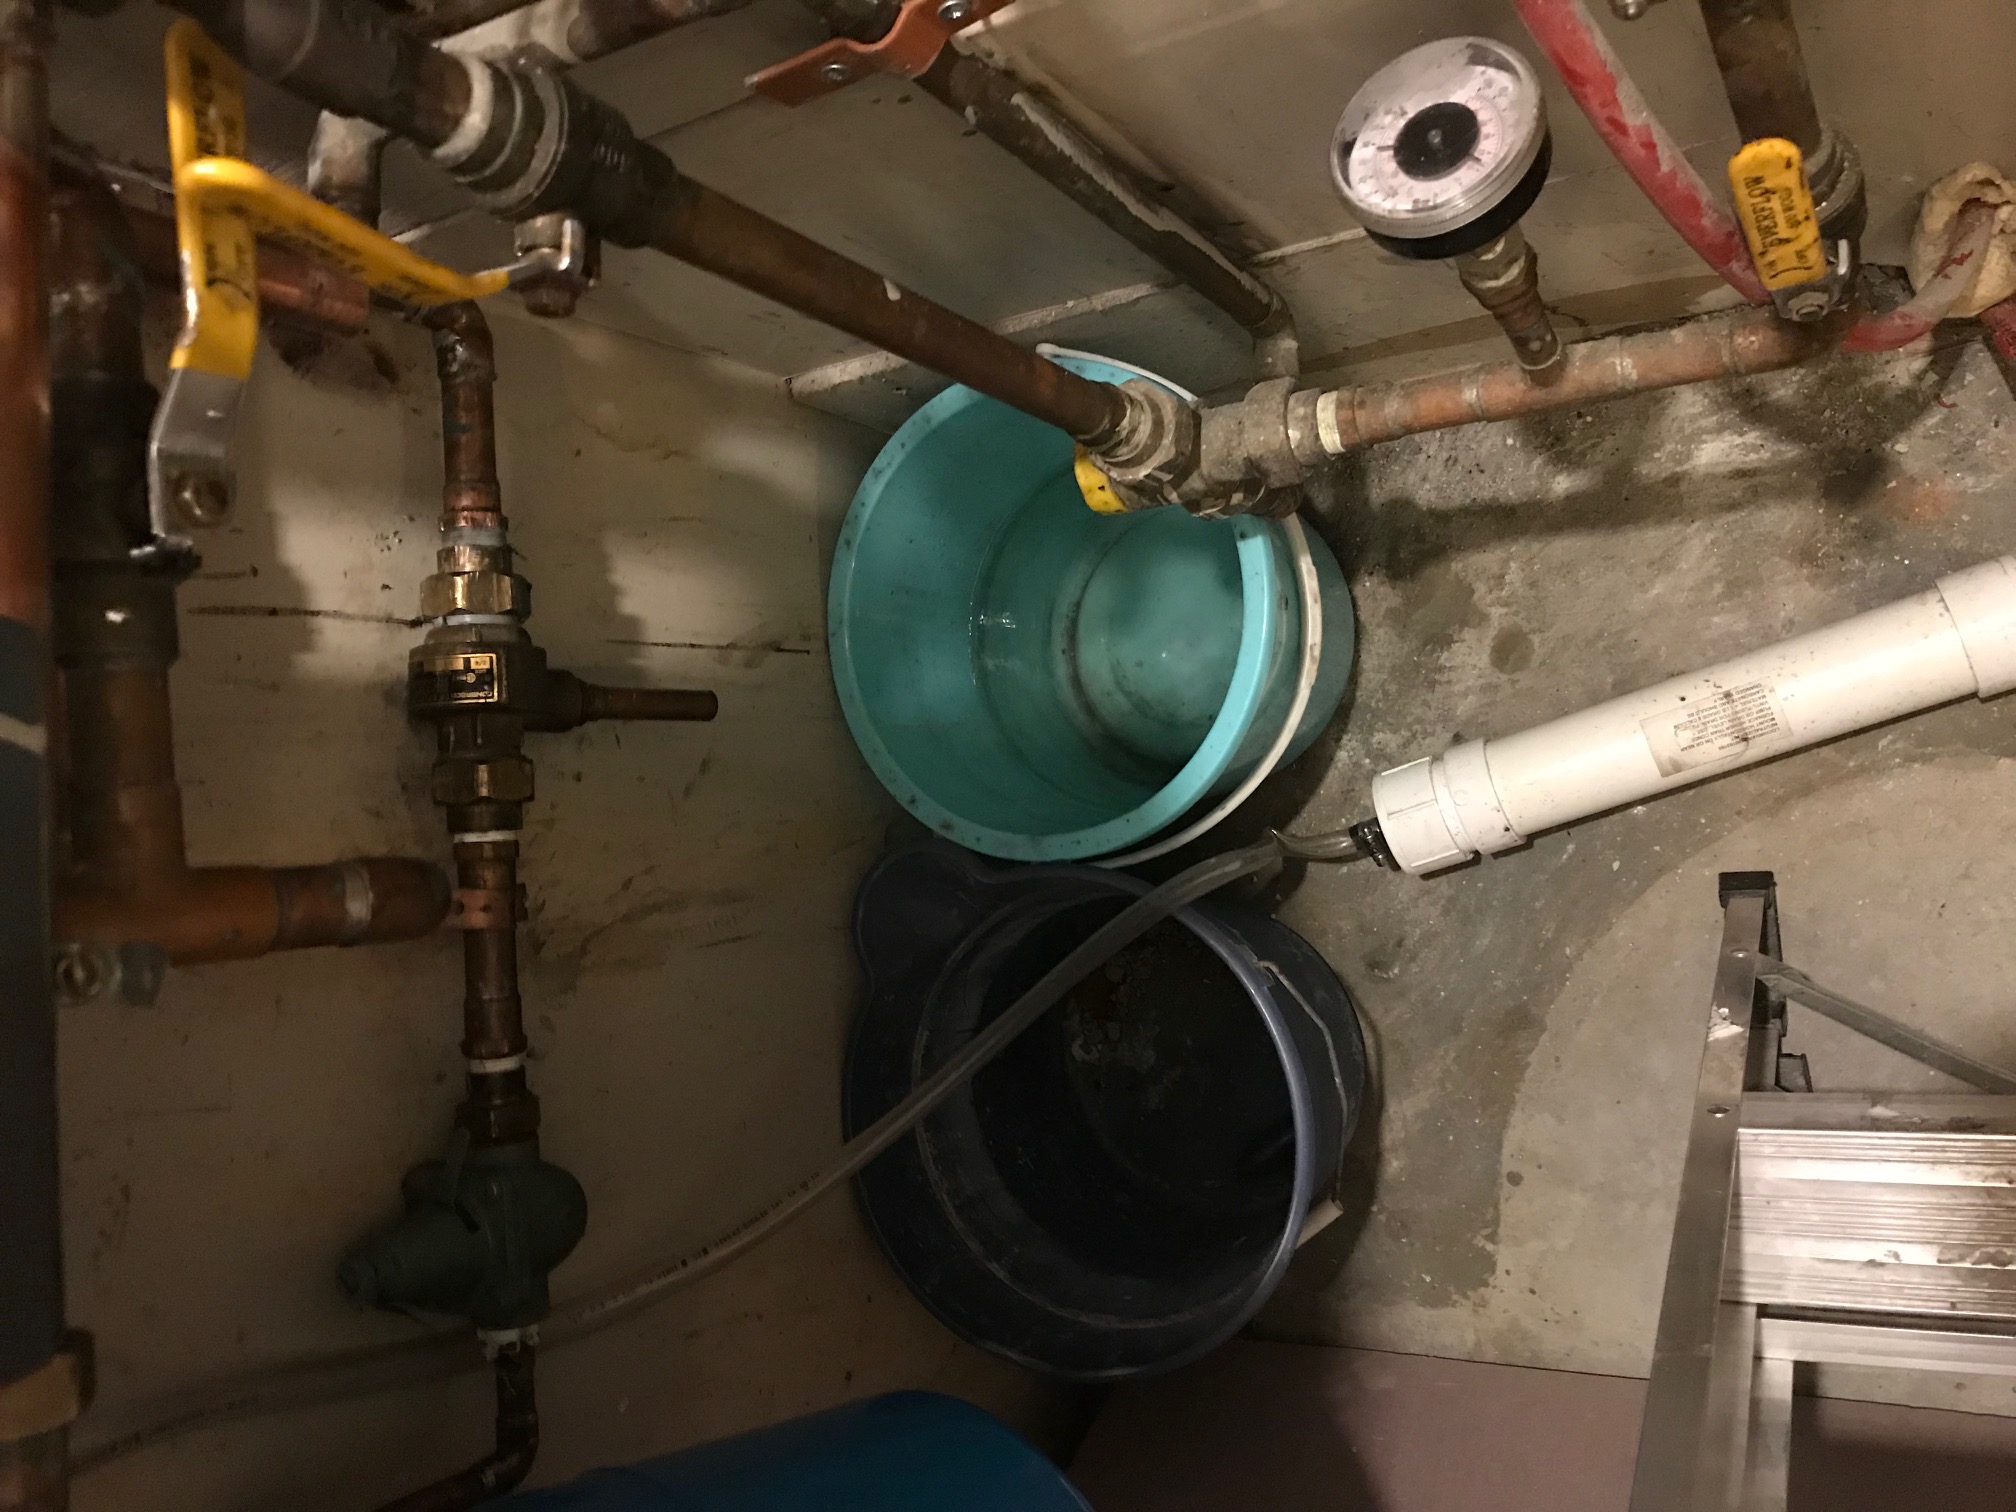 Leaking water from "New" Hot water tank